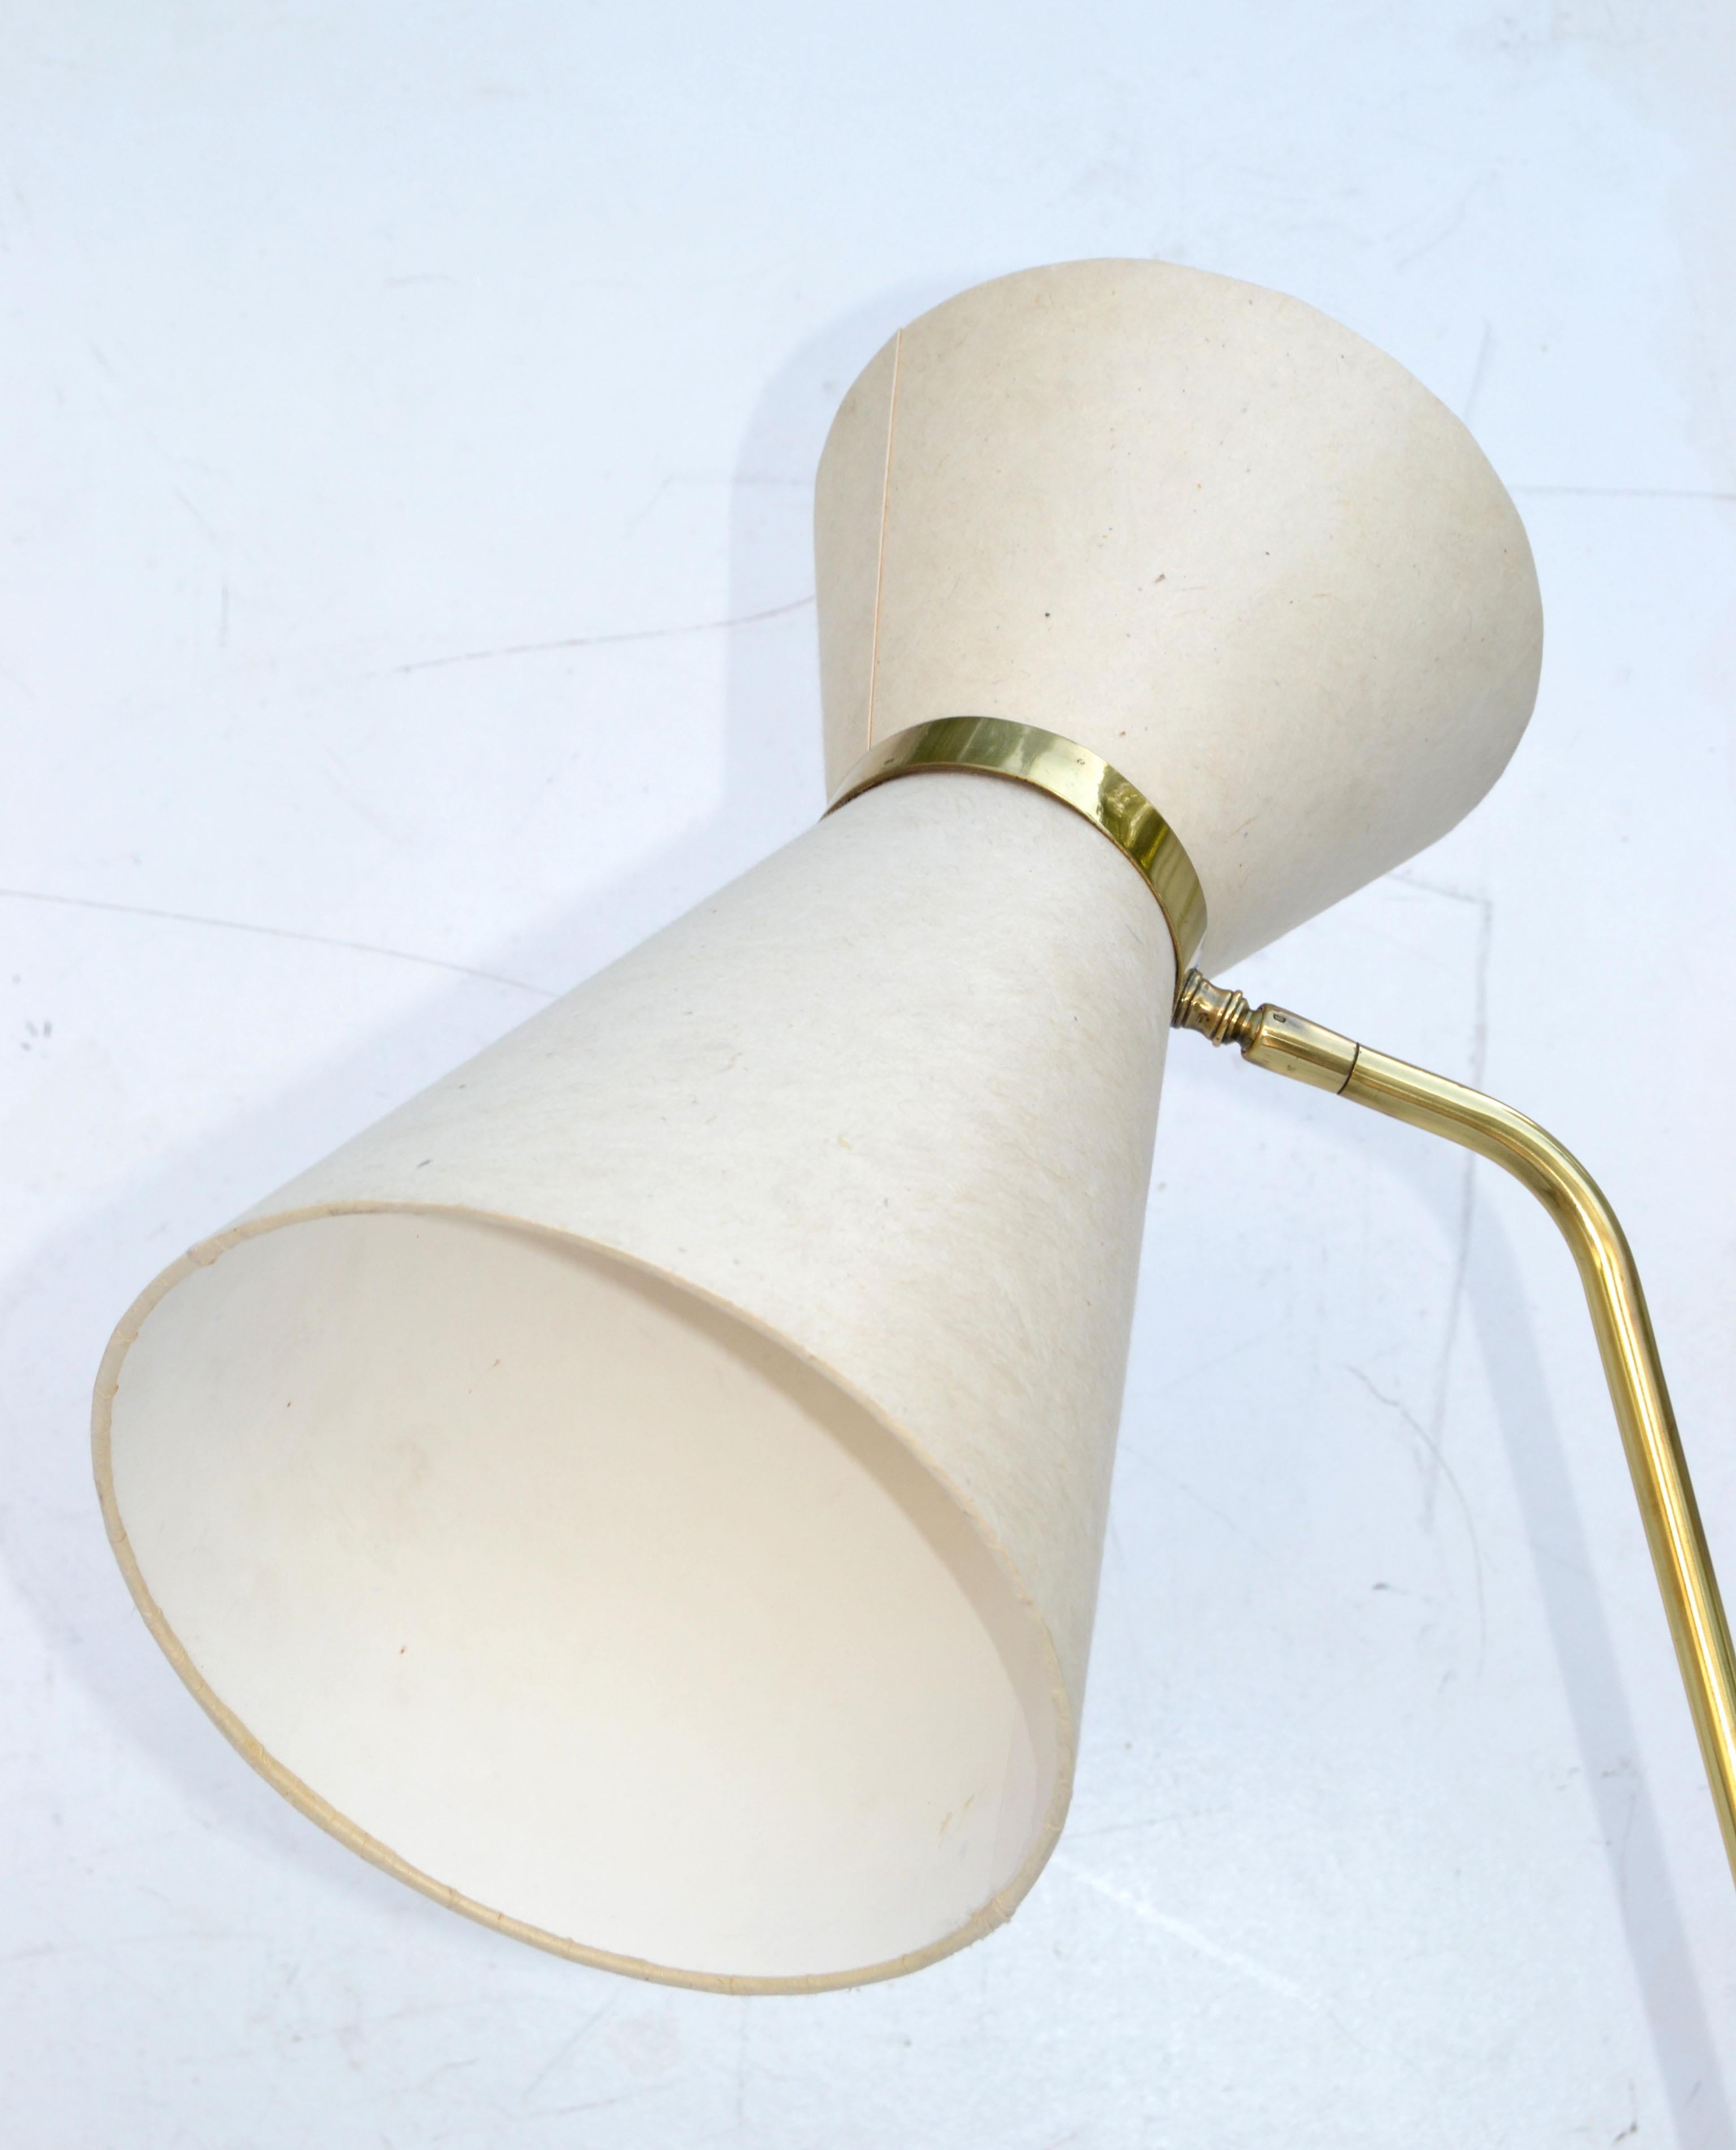 Pierre Guariche Model G2 Equilibrium Floor Lamp by Mathieu Diderot, Paris 1950 In Good Condition For Sale In Miami, FL